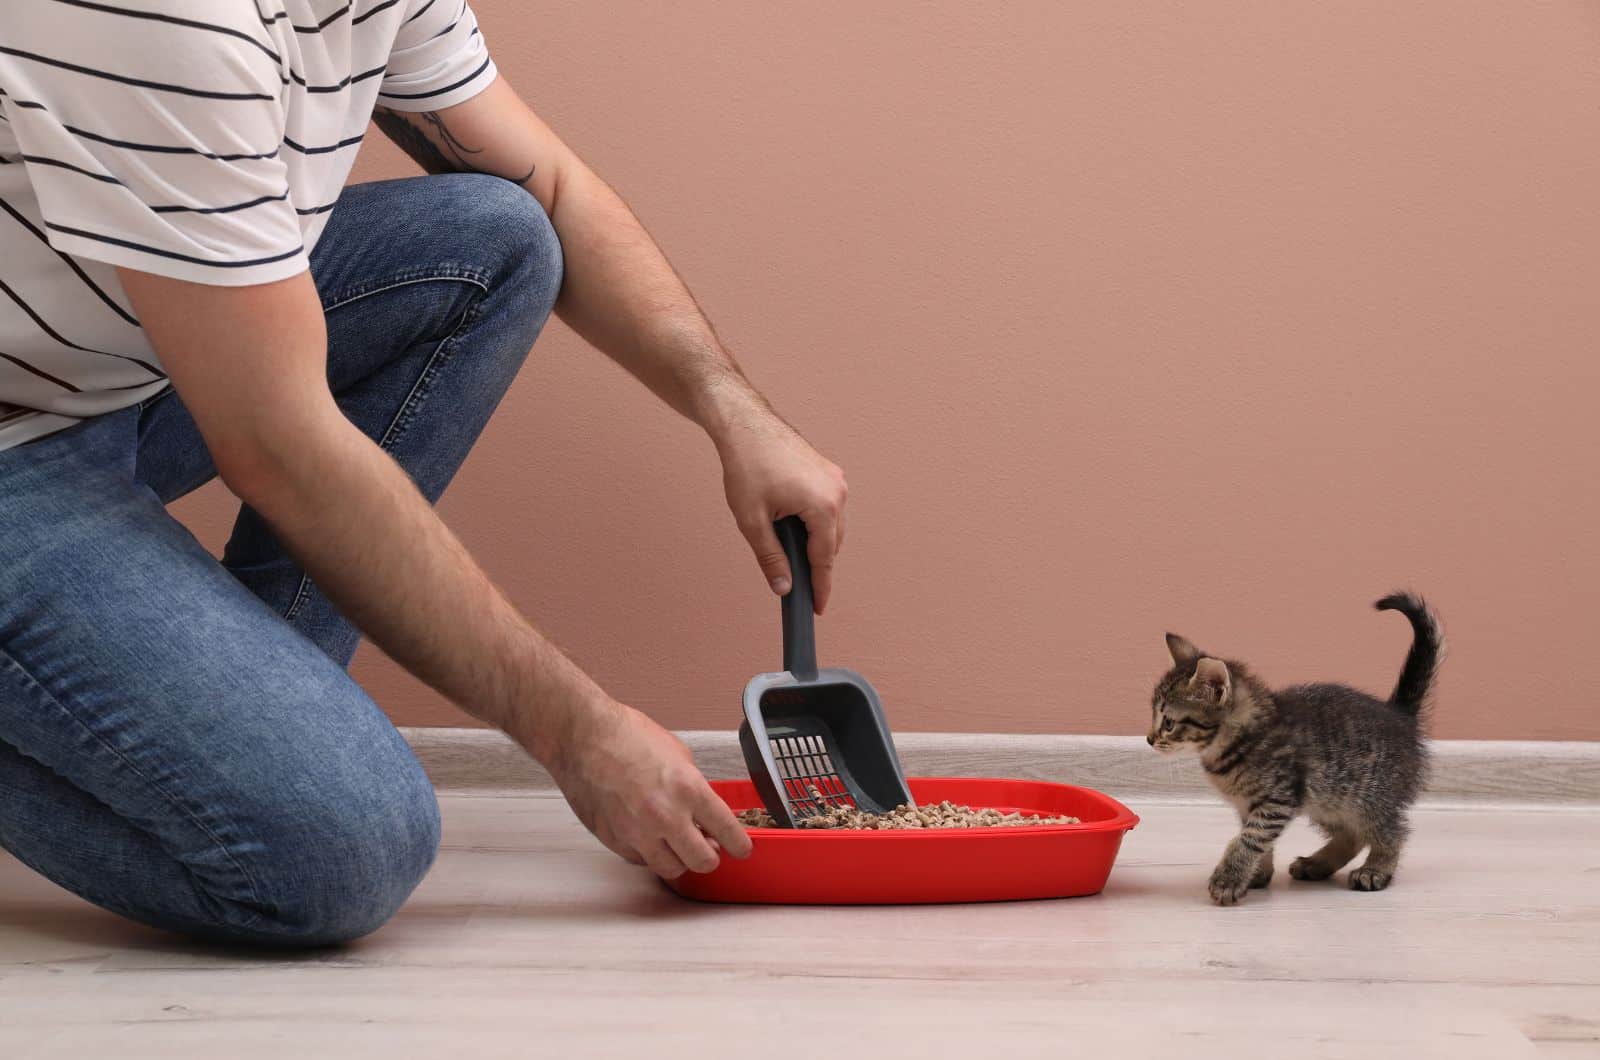 owner cleaning cat's litter